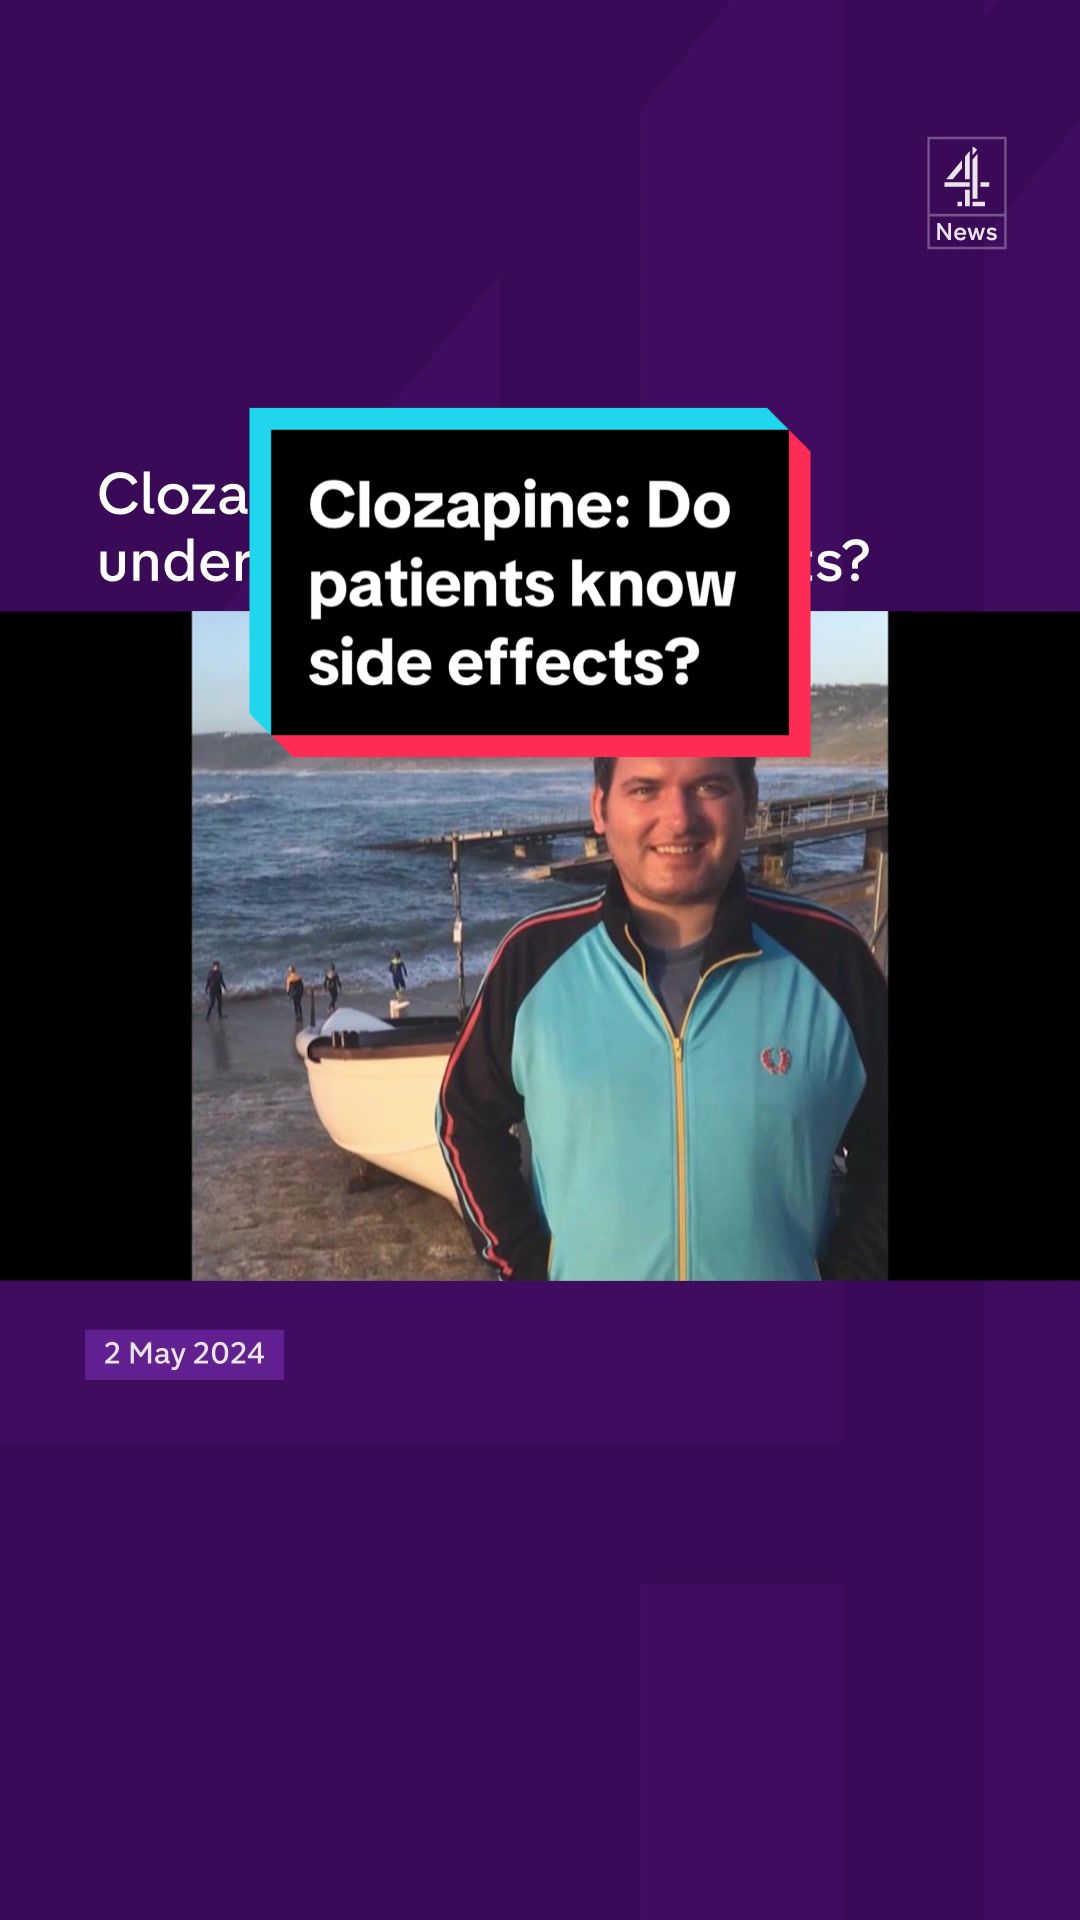 The families of people who have died while taking an anti-psychotic drug say there needs to be a wholesale change in how it's monitored. Clozapine is primarily used to treat drug-resistant schizophrenia. Its benefits are huge, but without proper monitoring risks can be fatal. #News #C4News #Channel4News #Clozapine #Schizophrenia #Health #mentalhealth